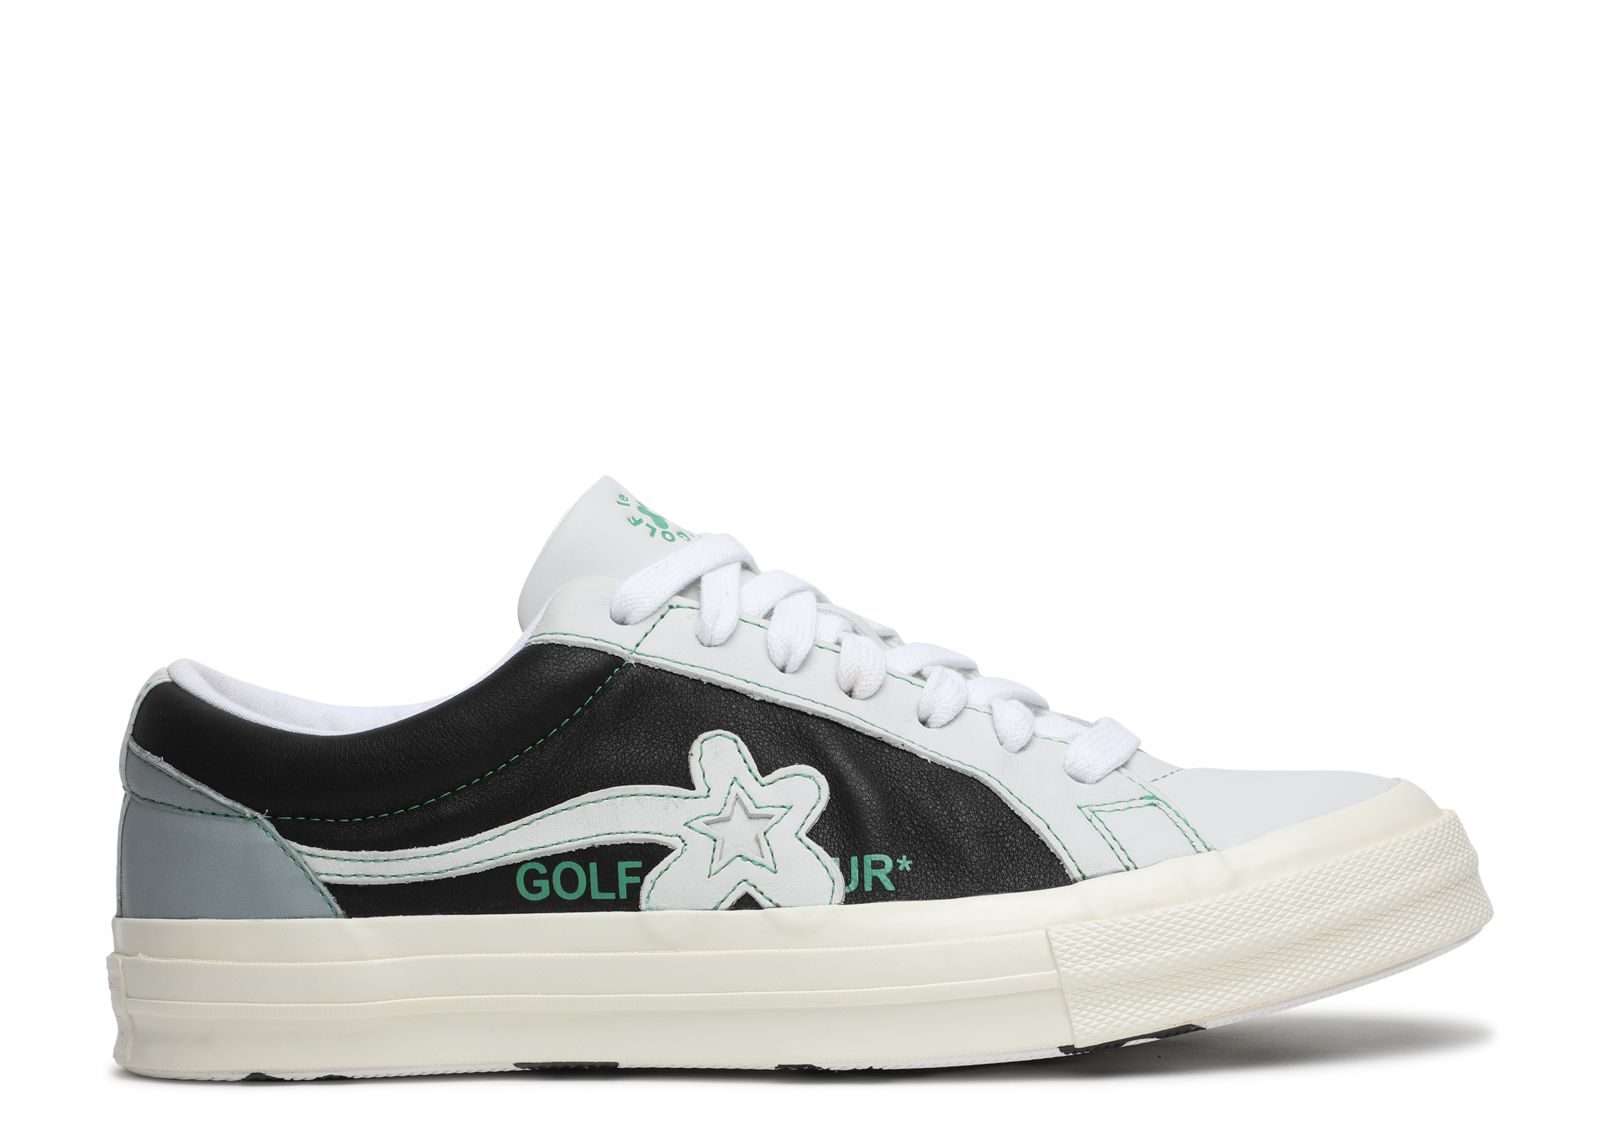 Кроссовки Converse Golf Le Fleur X One Star Ox 'Industrial Pack - Grey', белый 13pcs pack standard size professional carbon yarn golf irons grip golf club wood grip 9 color available agarre del palo de golf